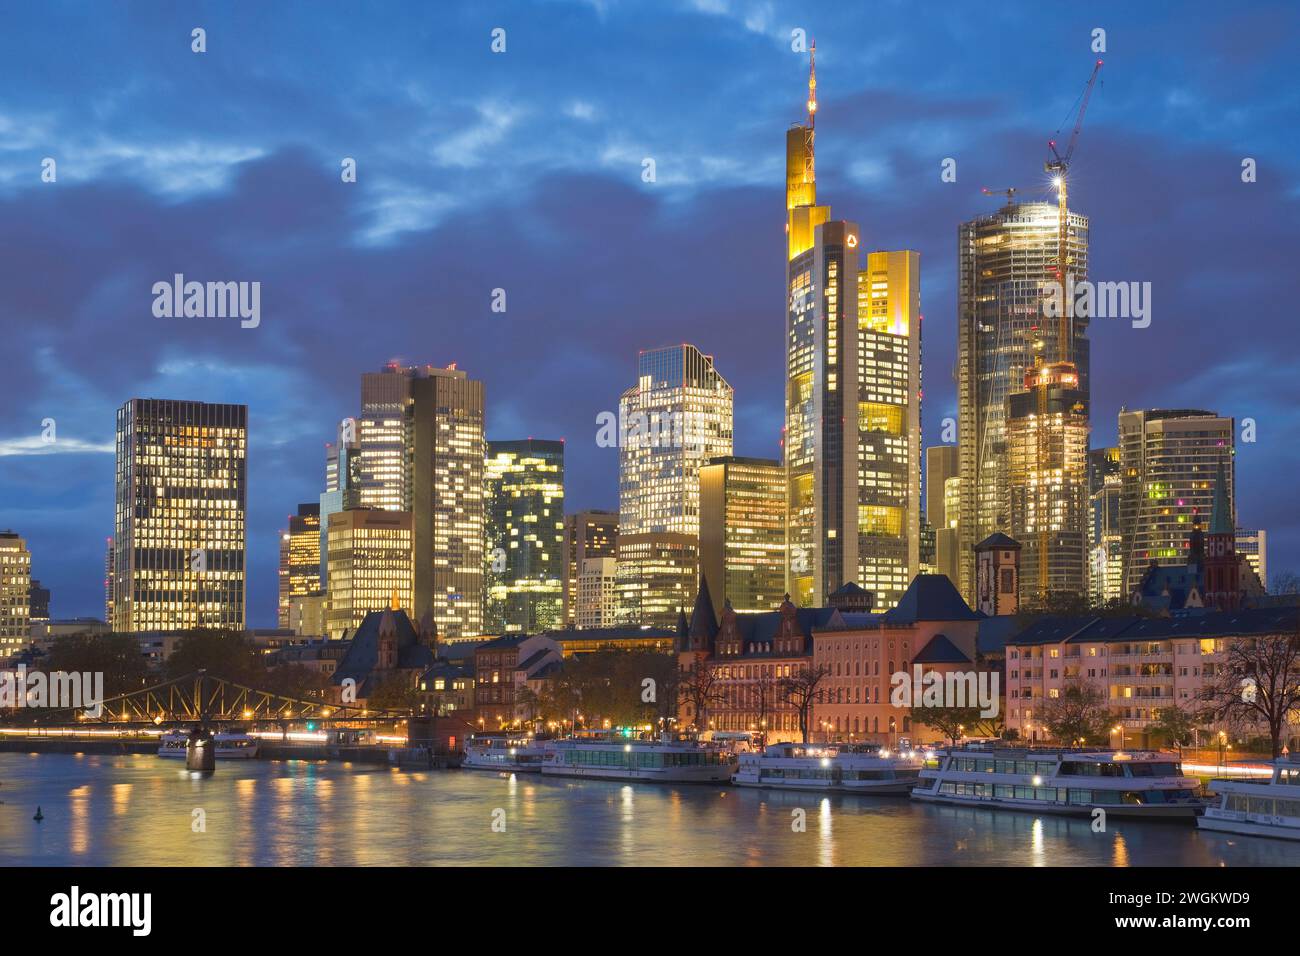 City view in the evening with Main and banking district, Germany, Hesse, Frankfurt am Main Stock Photo